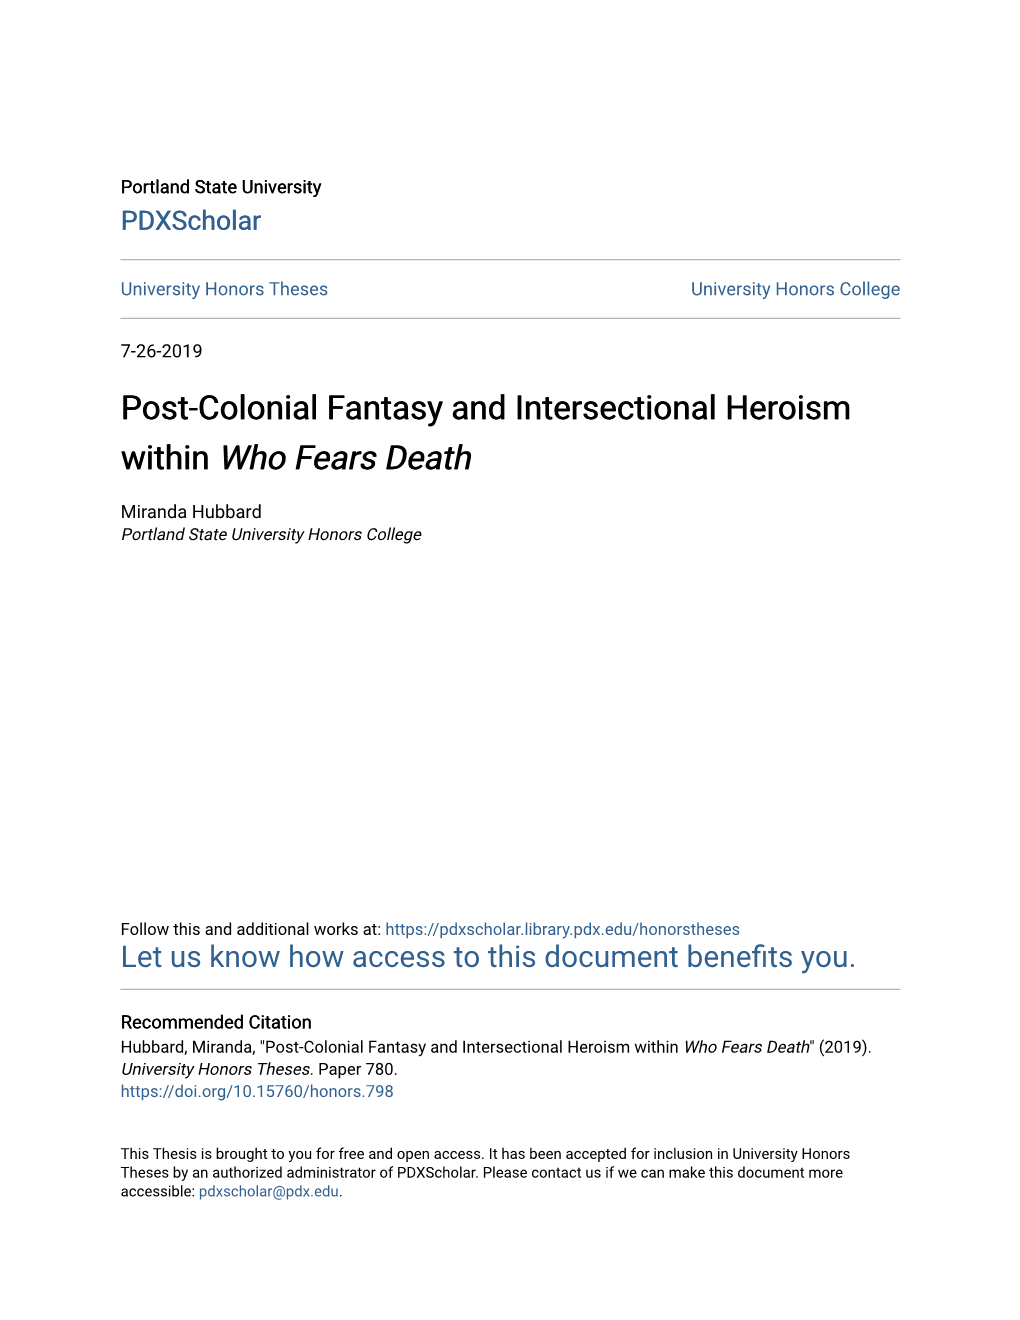 Post-Colonial Fantasy and Intersectional Heroism Within Who Fears Death